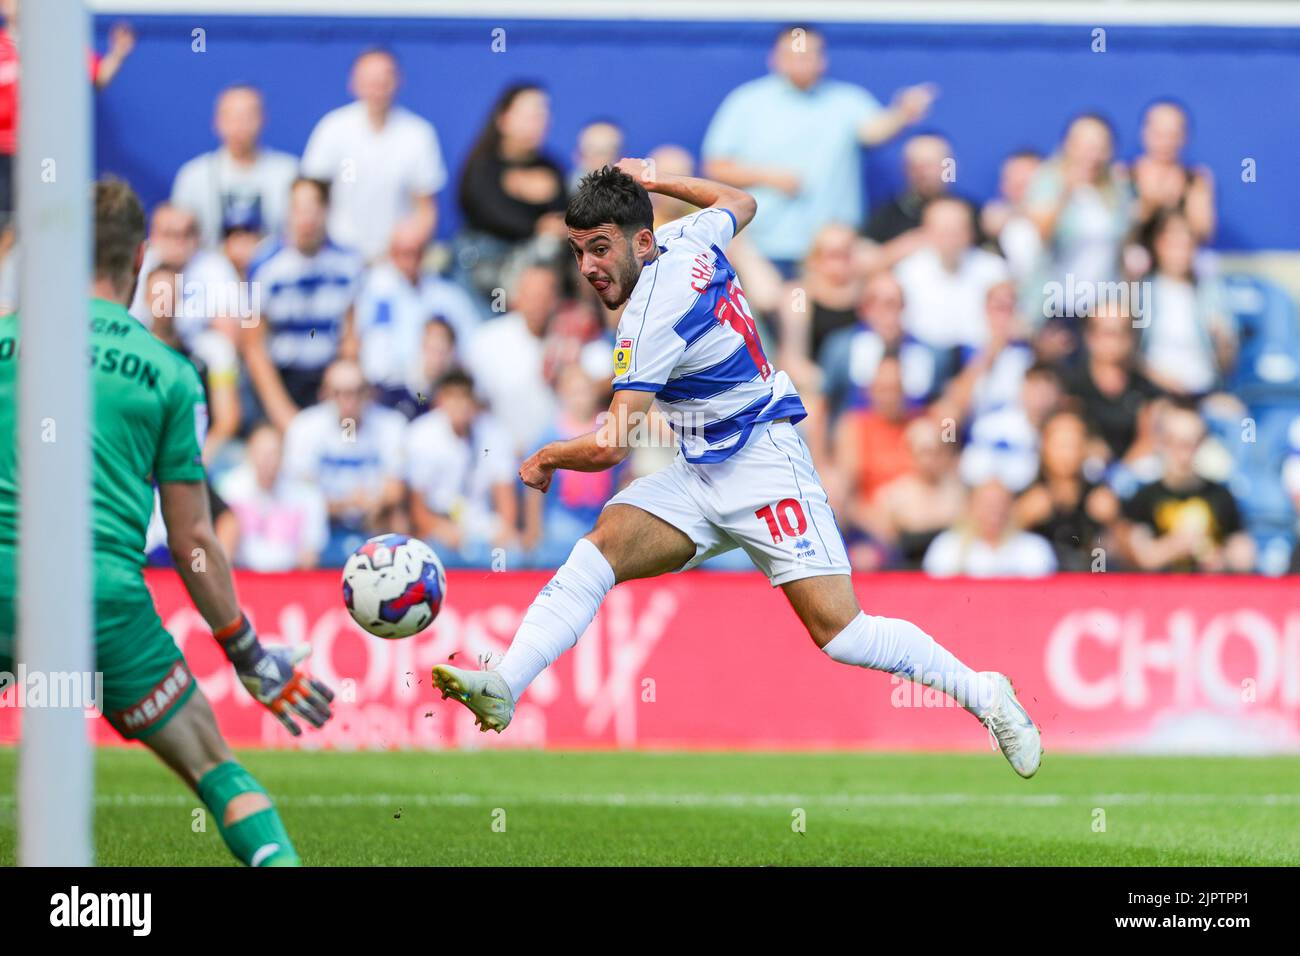 London, UK. 20th August, 2022. QPR's Ilias Chair shoots during the Sky Bet Championship match between Queens Park Rangers and Rotherham United at the Loftus Road Stadium, London on Saturday 20th August 2022. (Credit: Ian Randall | MI News) Credit: MI News & Sport /Alamy Live News Stock Photo